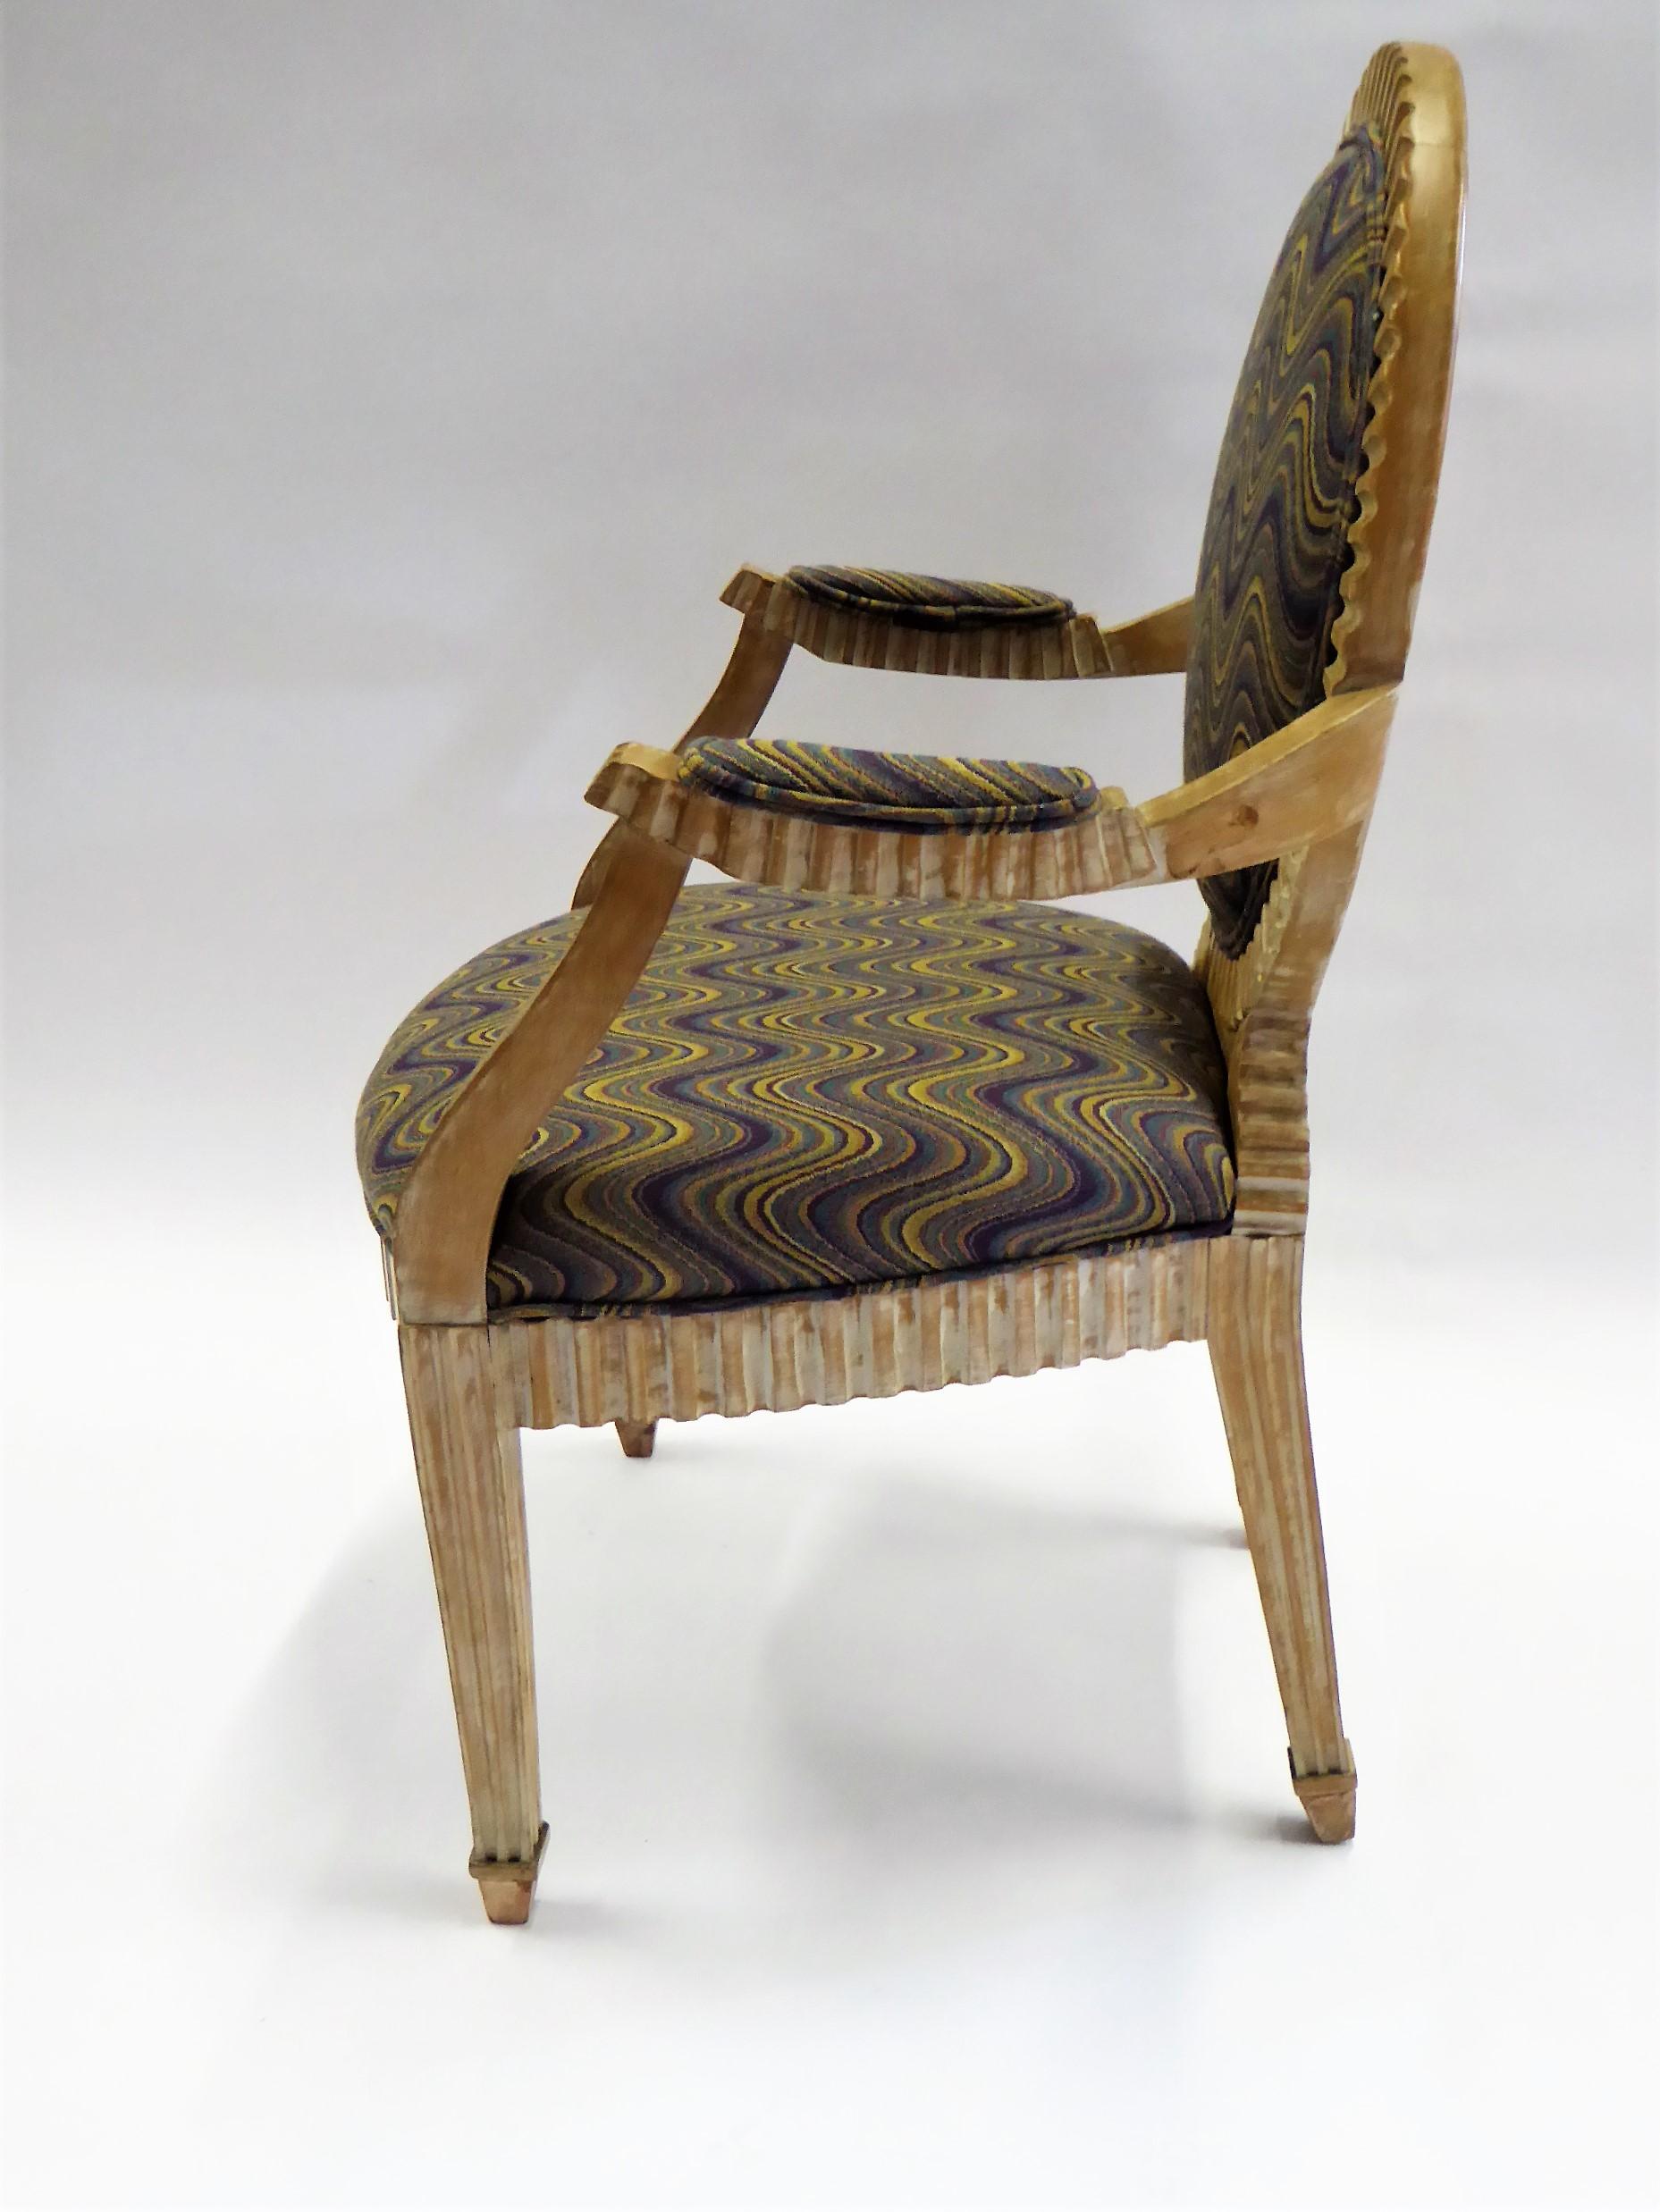 REDUCED FROM $1,050....In the style of John Hutton's Soleil design for Donghia, this fluted and cerused armchair is magnificent. Newly upholstered in a modern flame stich weave and with a raffia upholstered back. Wood under seat stamped made in